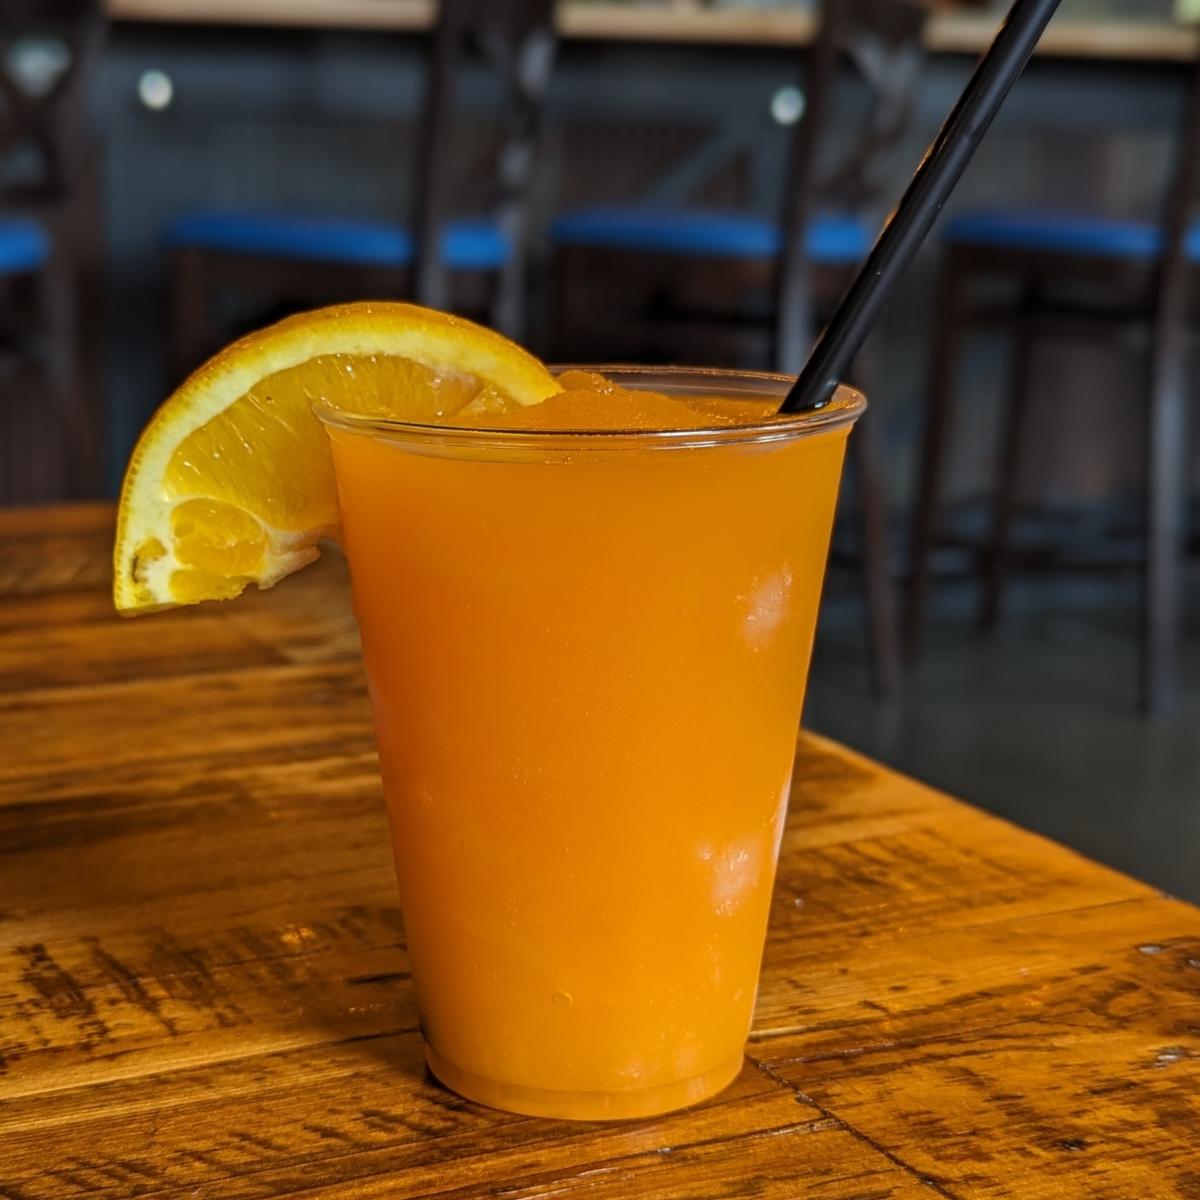 Image is of the Orange Creamsicle Frozen Cocktail with a straw and orange on the side.